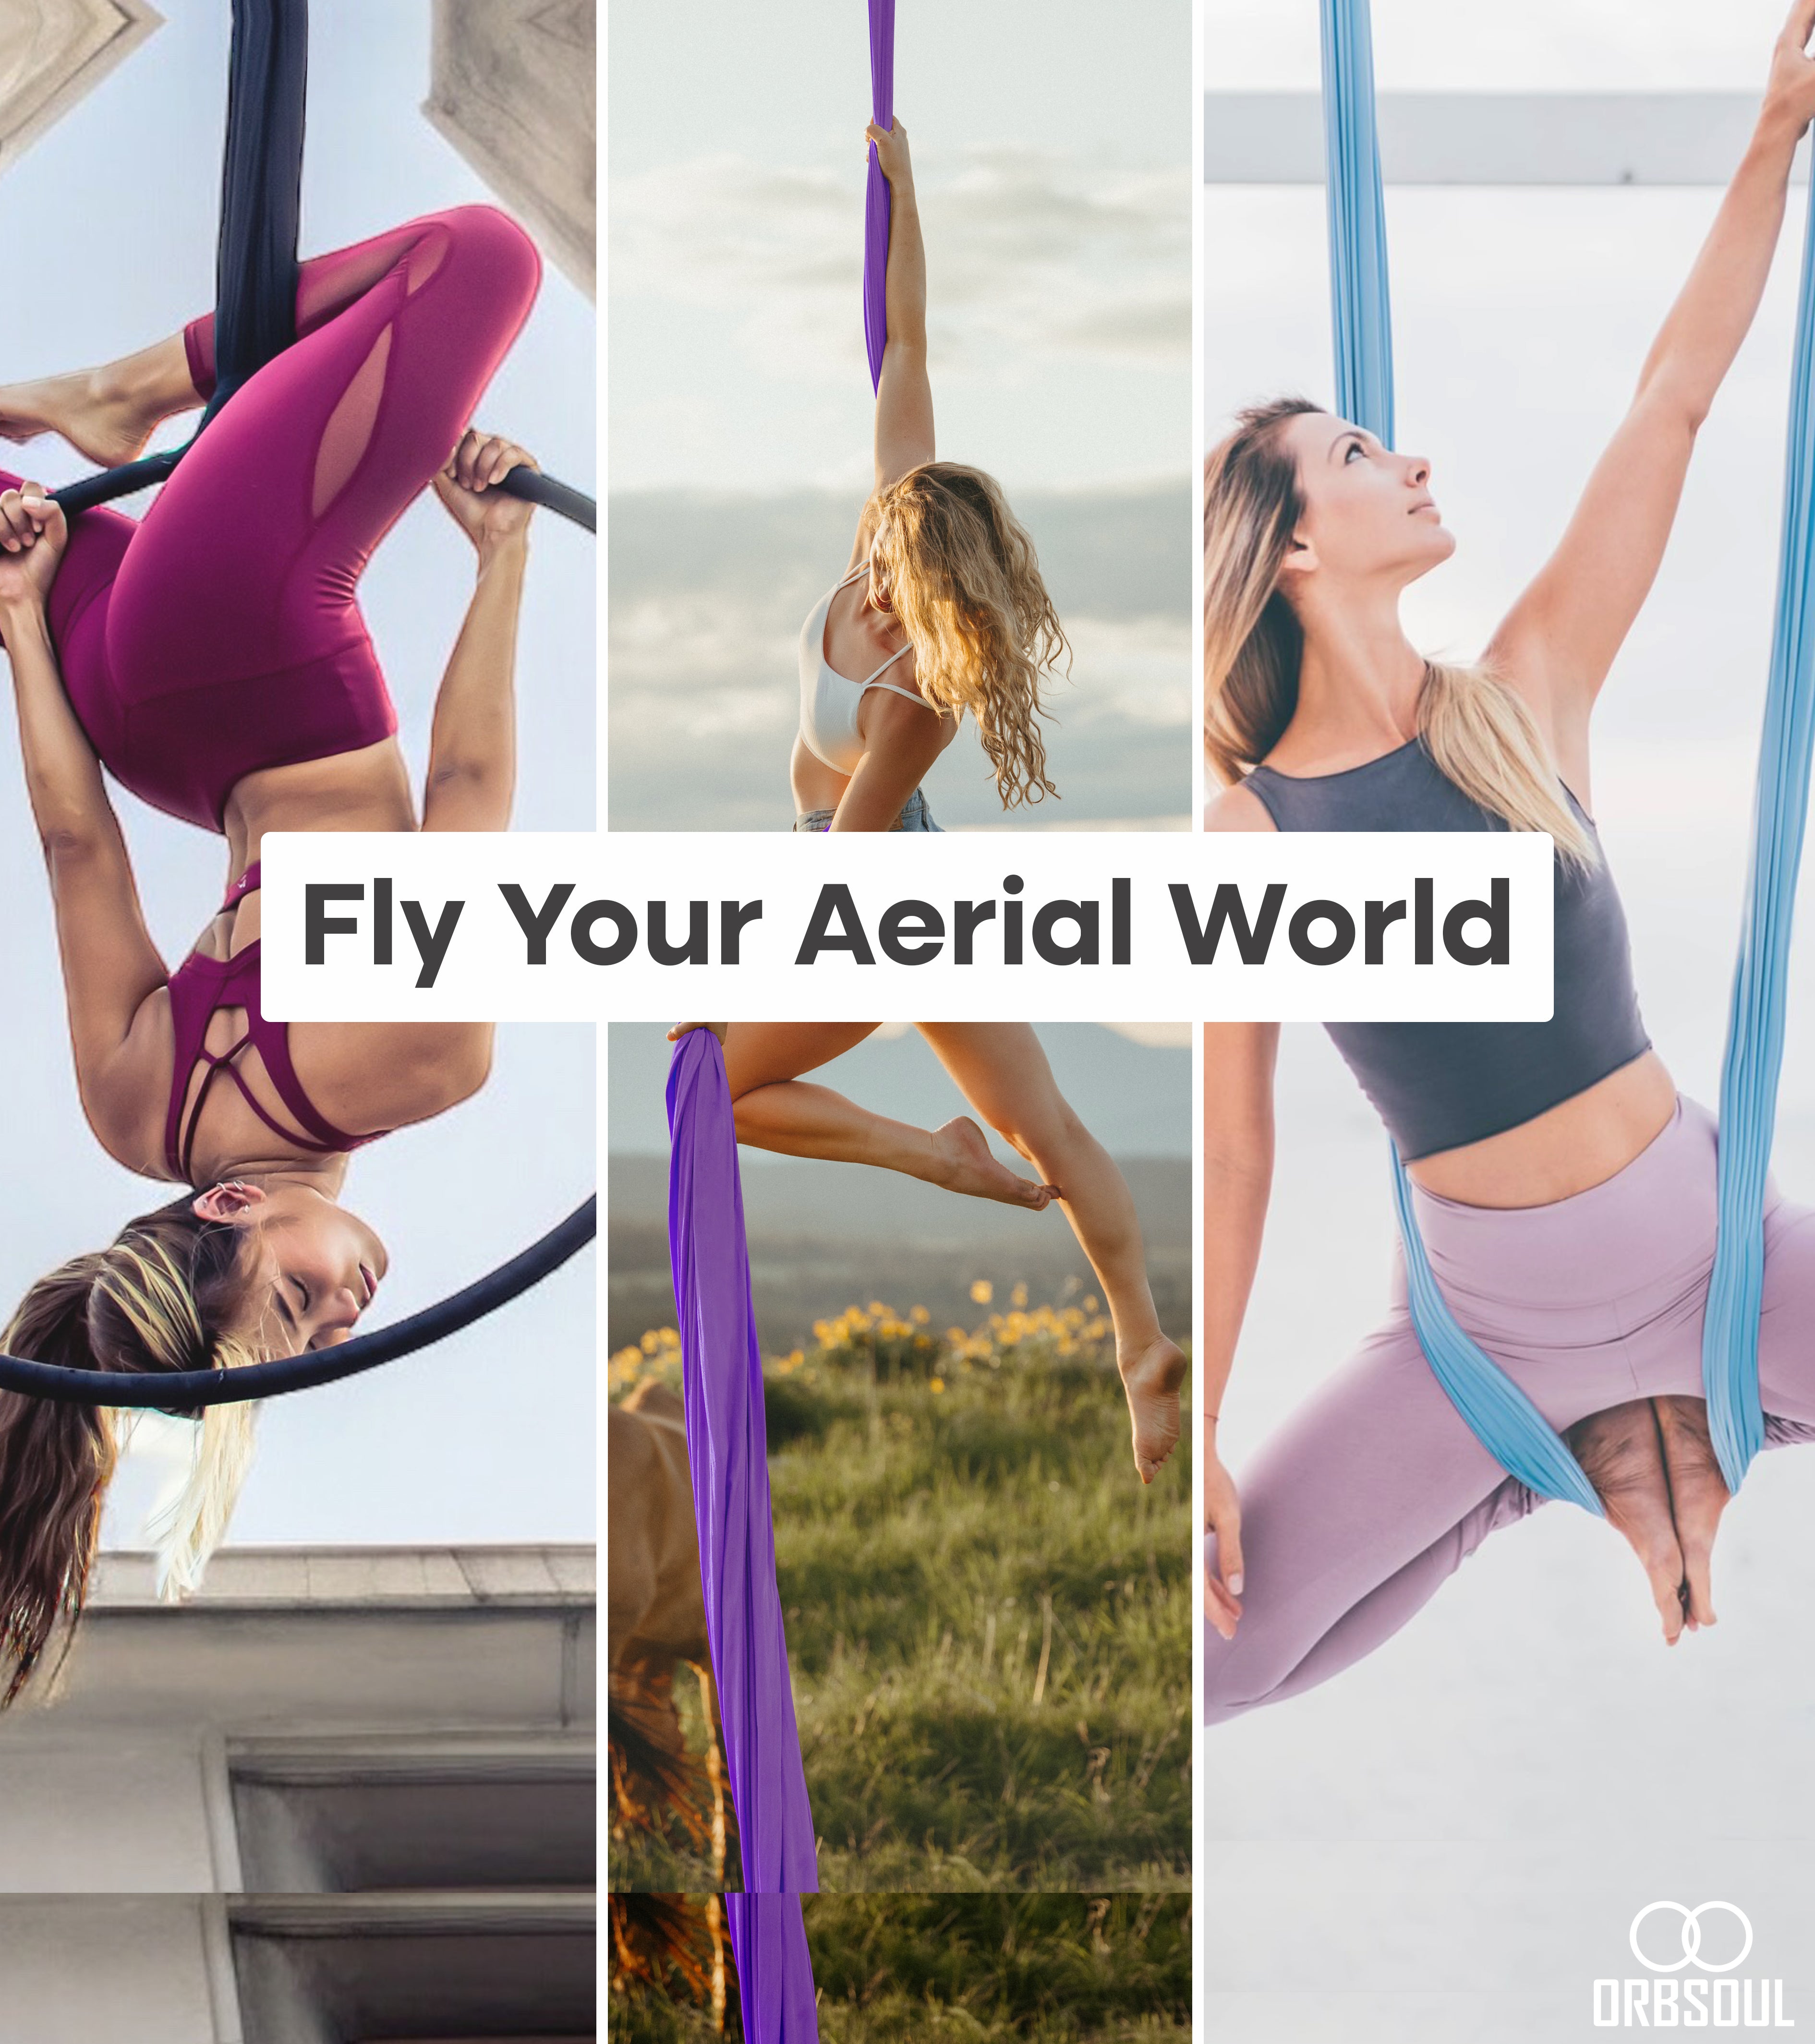 Orbsoul Essential aerial rigging set.  Fly your aerial world